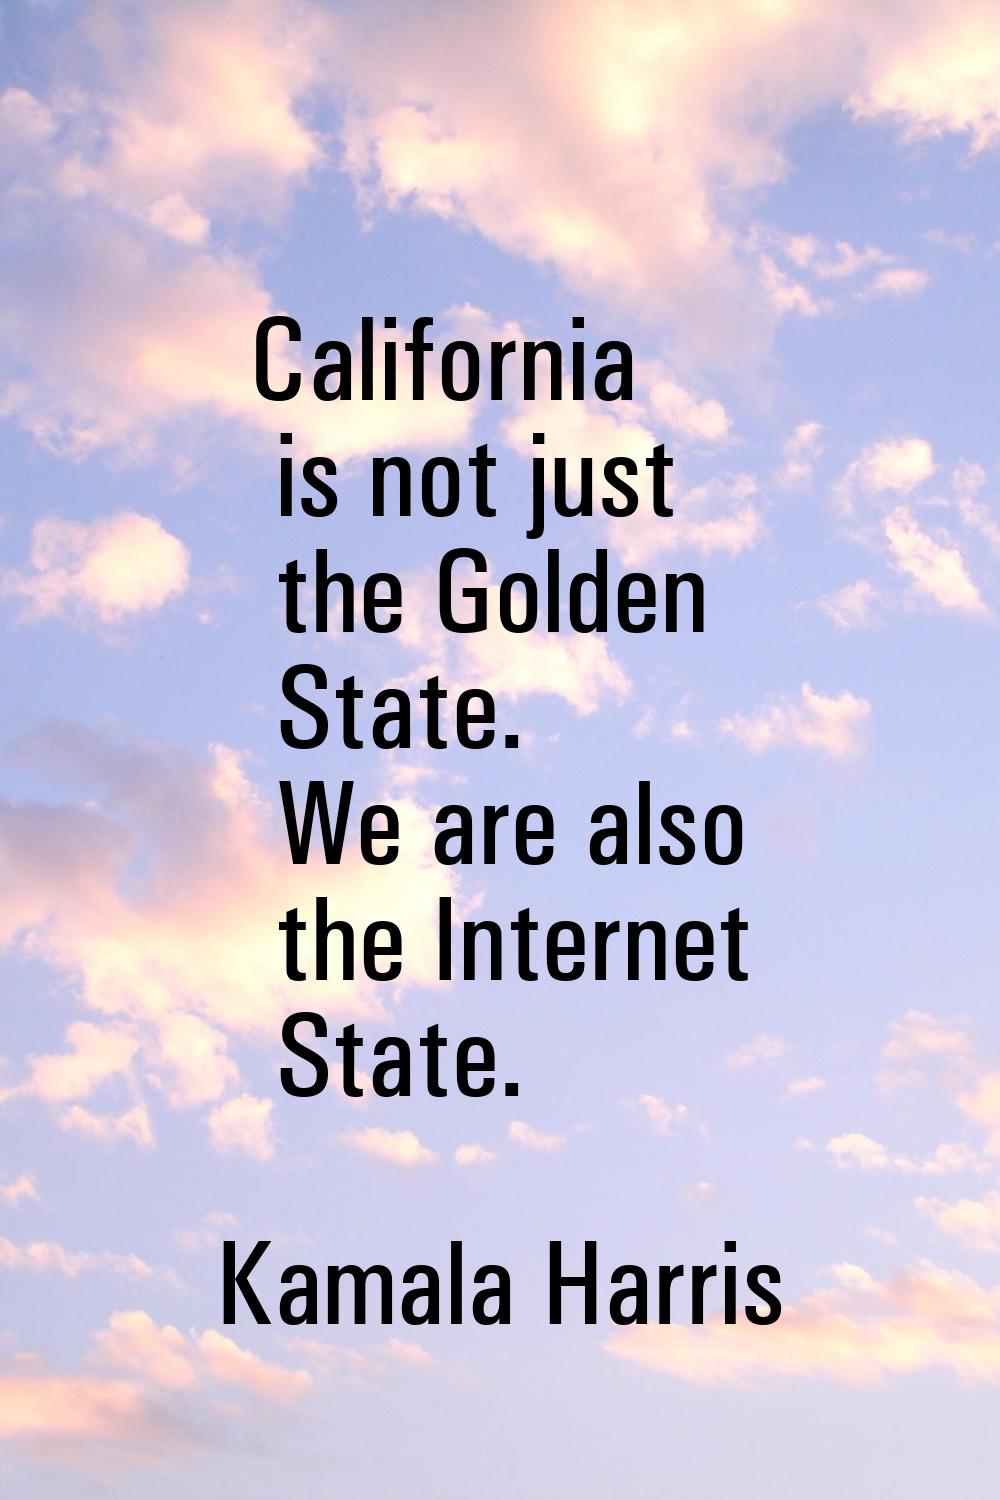 California is not just the Golden State. We are also the Internet State.